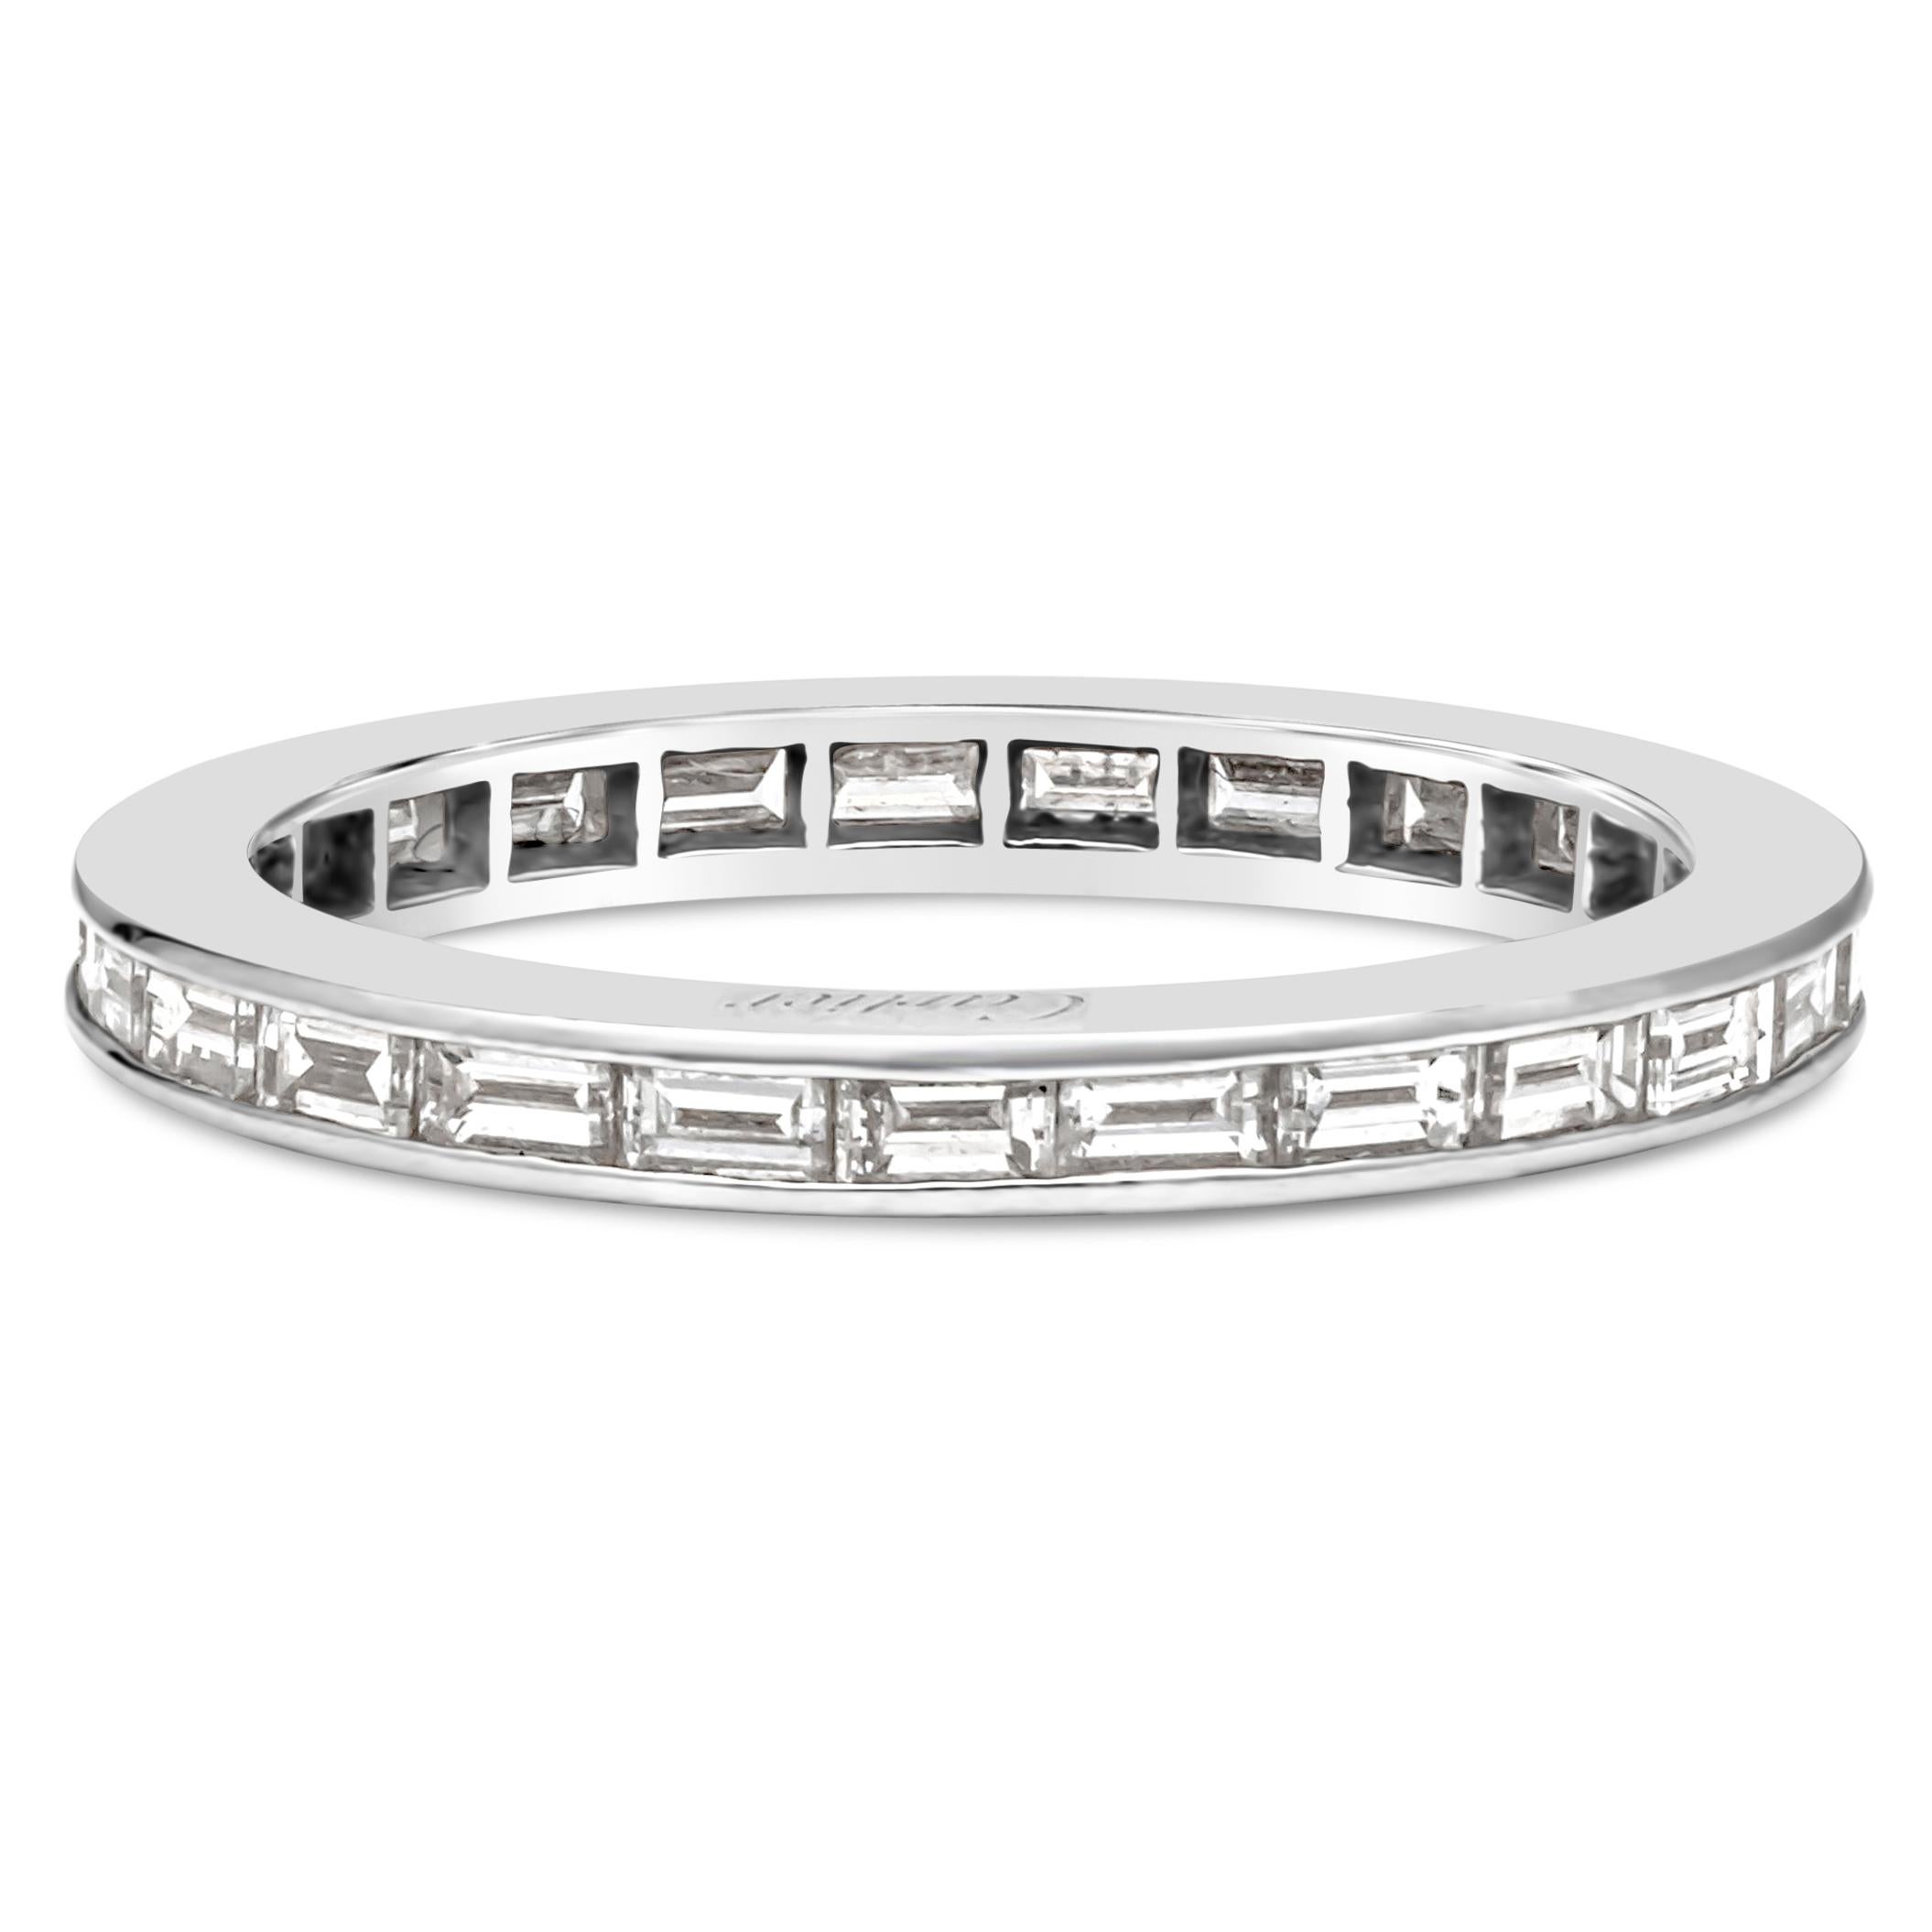 A beautiful eternity wedding band by Cartier, showcasing a row of 25 baguette cut diamonds weighing 1.02 carats total with approximately D-E color and VVS clarity, channel set on platinum. Signed by Cartier. Size 7 US. Comes with original box.